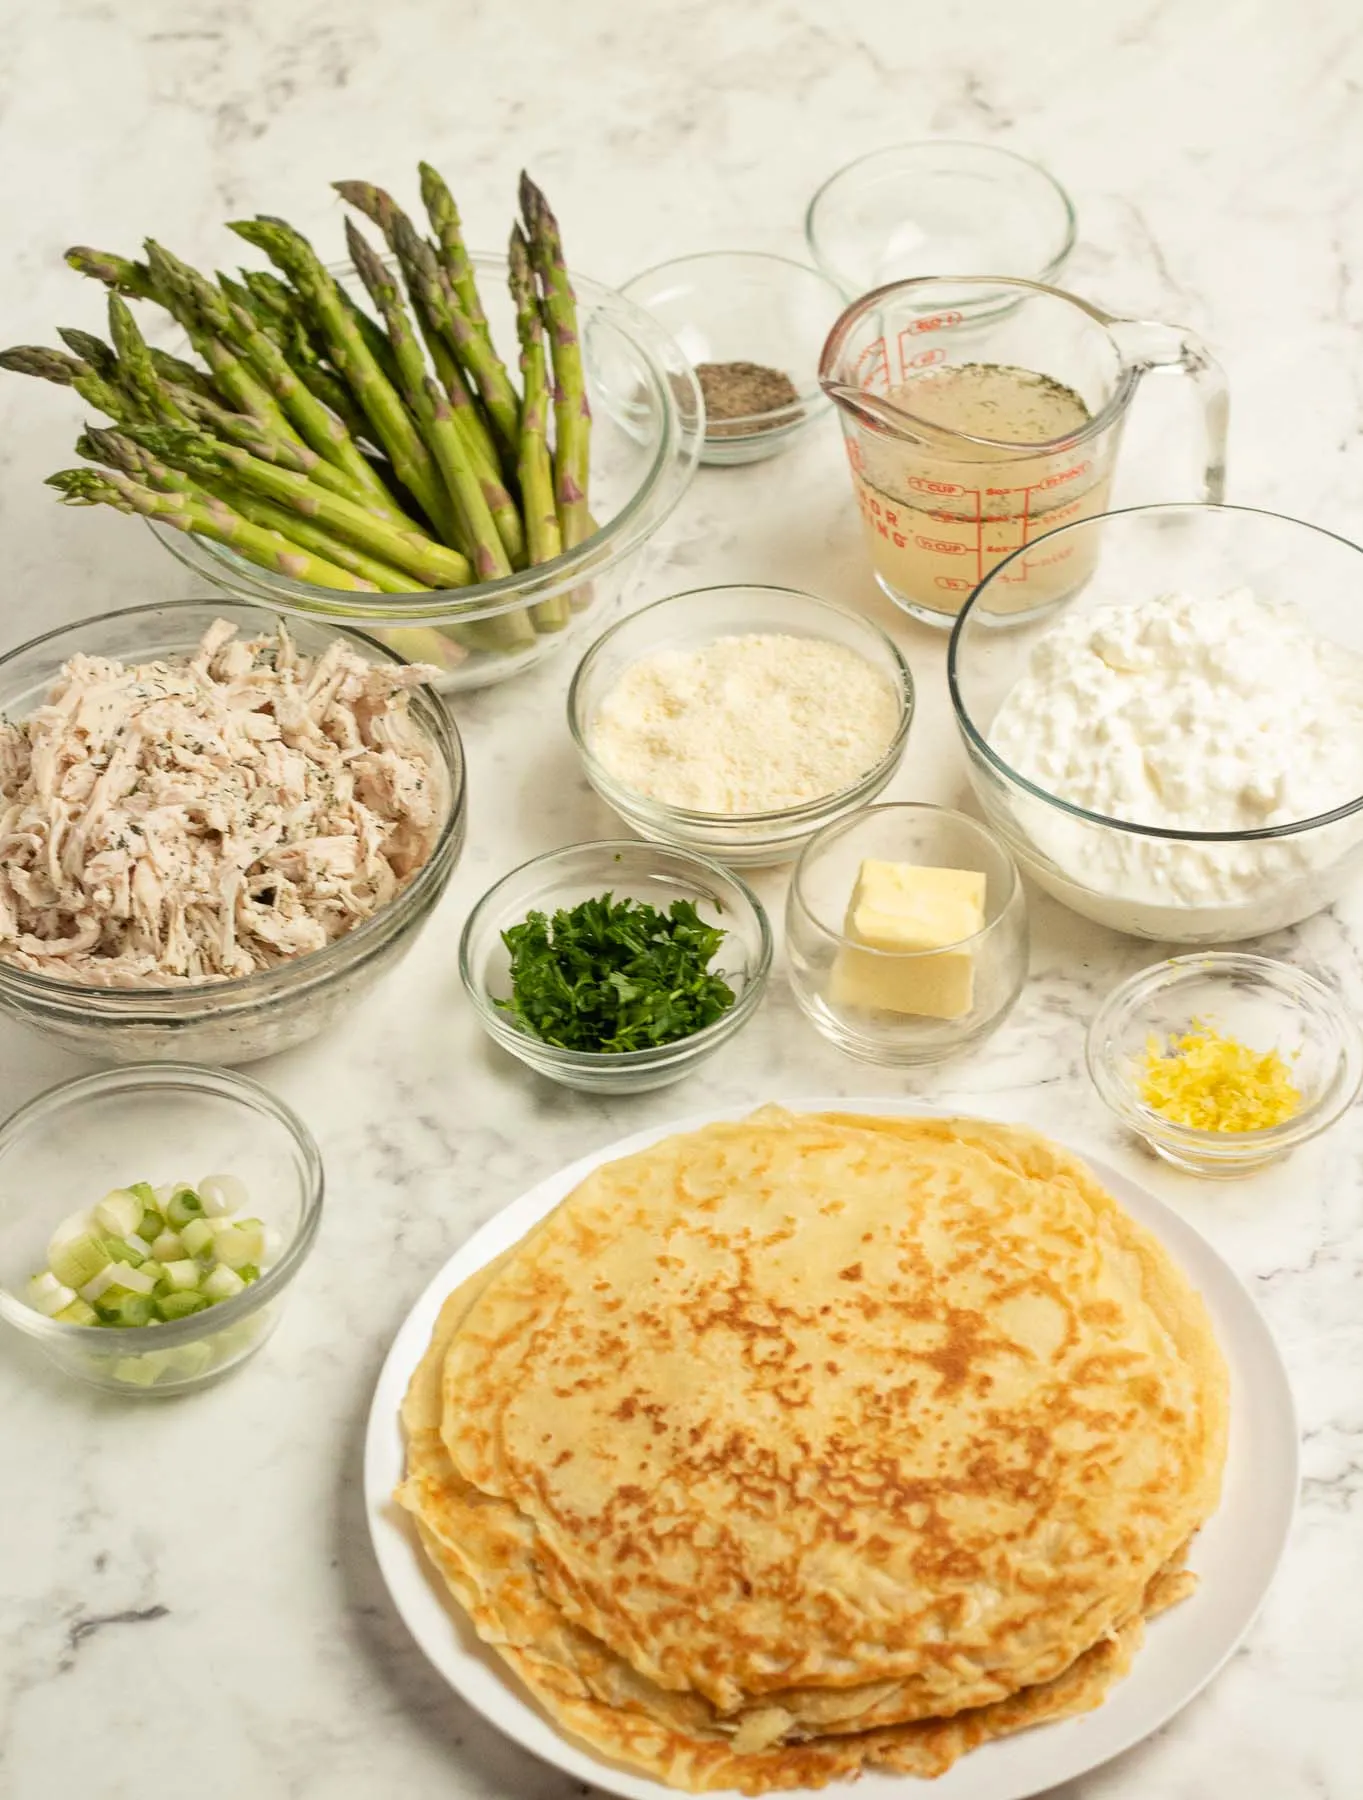 Ingredients for savory chicken crepes with asparagus.